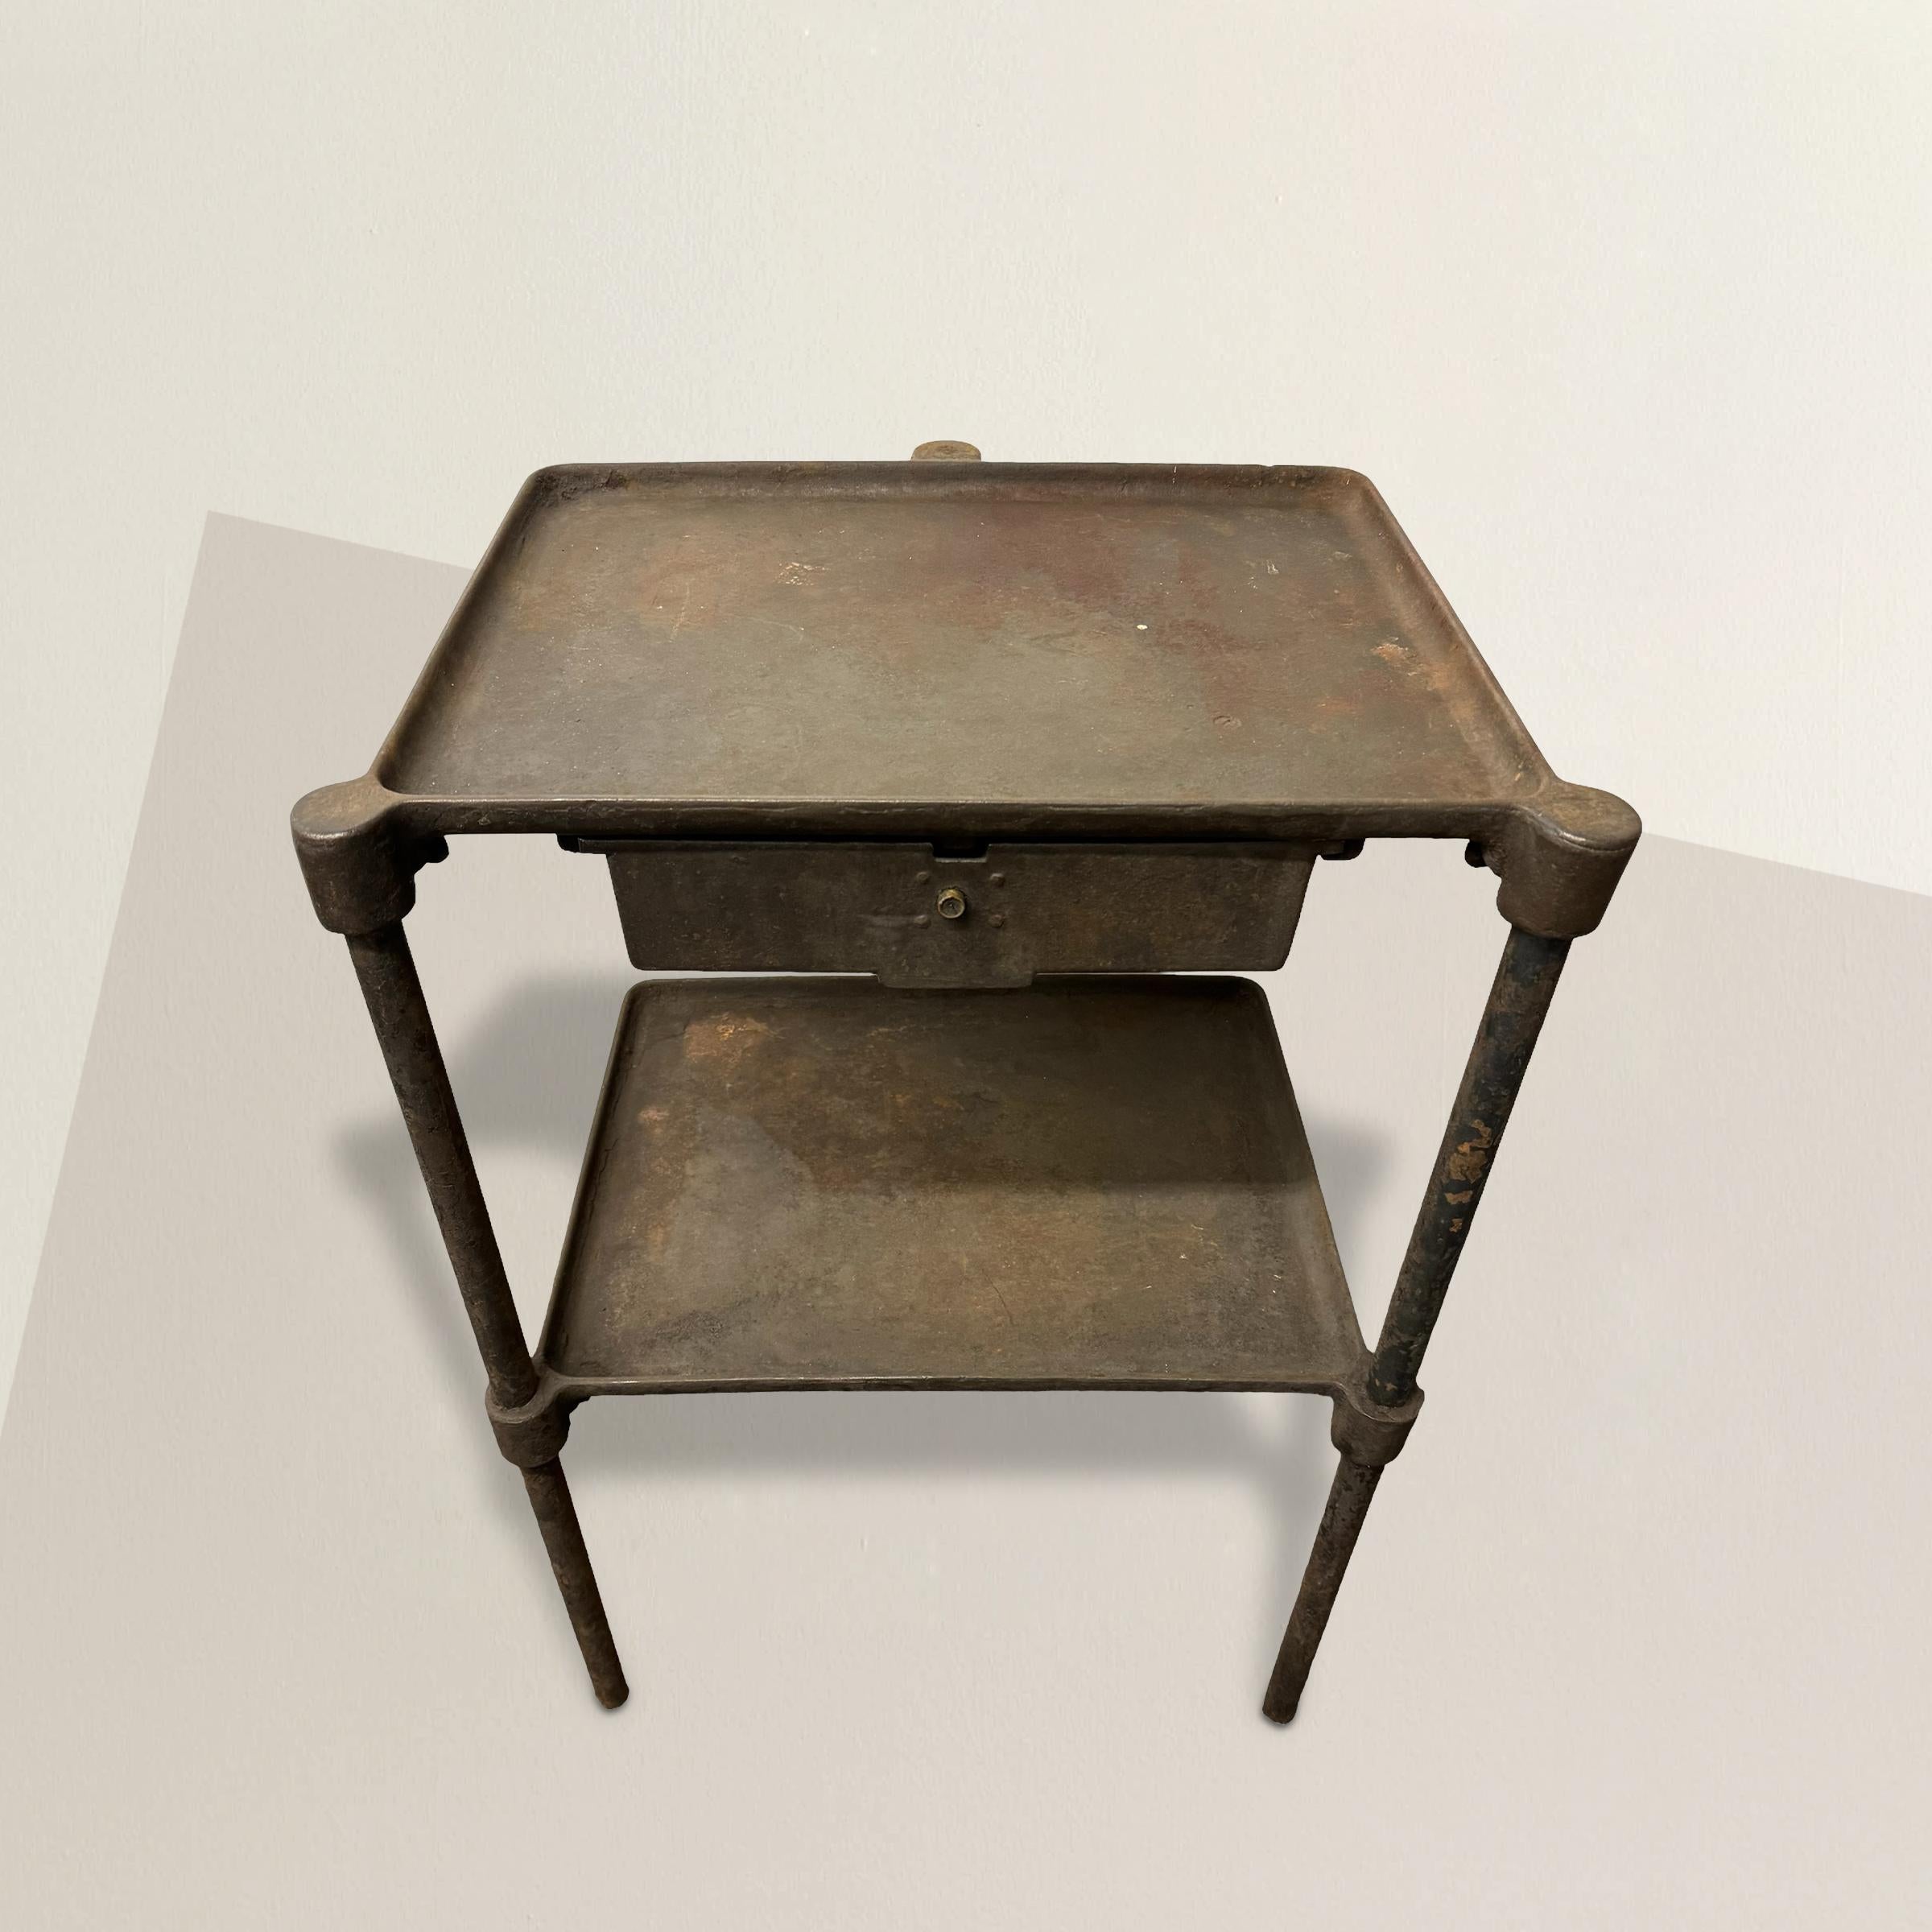 This early 20th-century American industrial steel table embodies the raw functionality and utilitarian aesthetic of industrial design. With three sturdy legs, a single drawer, and a shelf below, this table was designed for practicality rather than